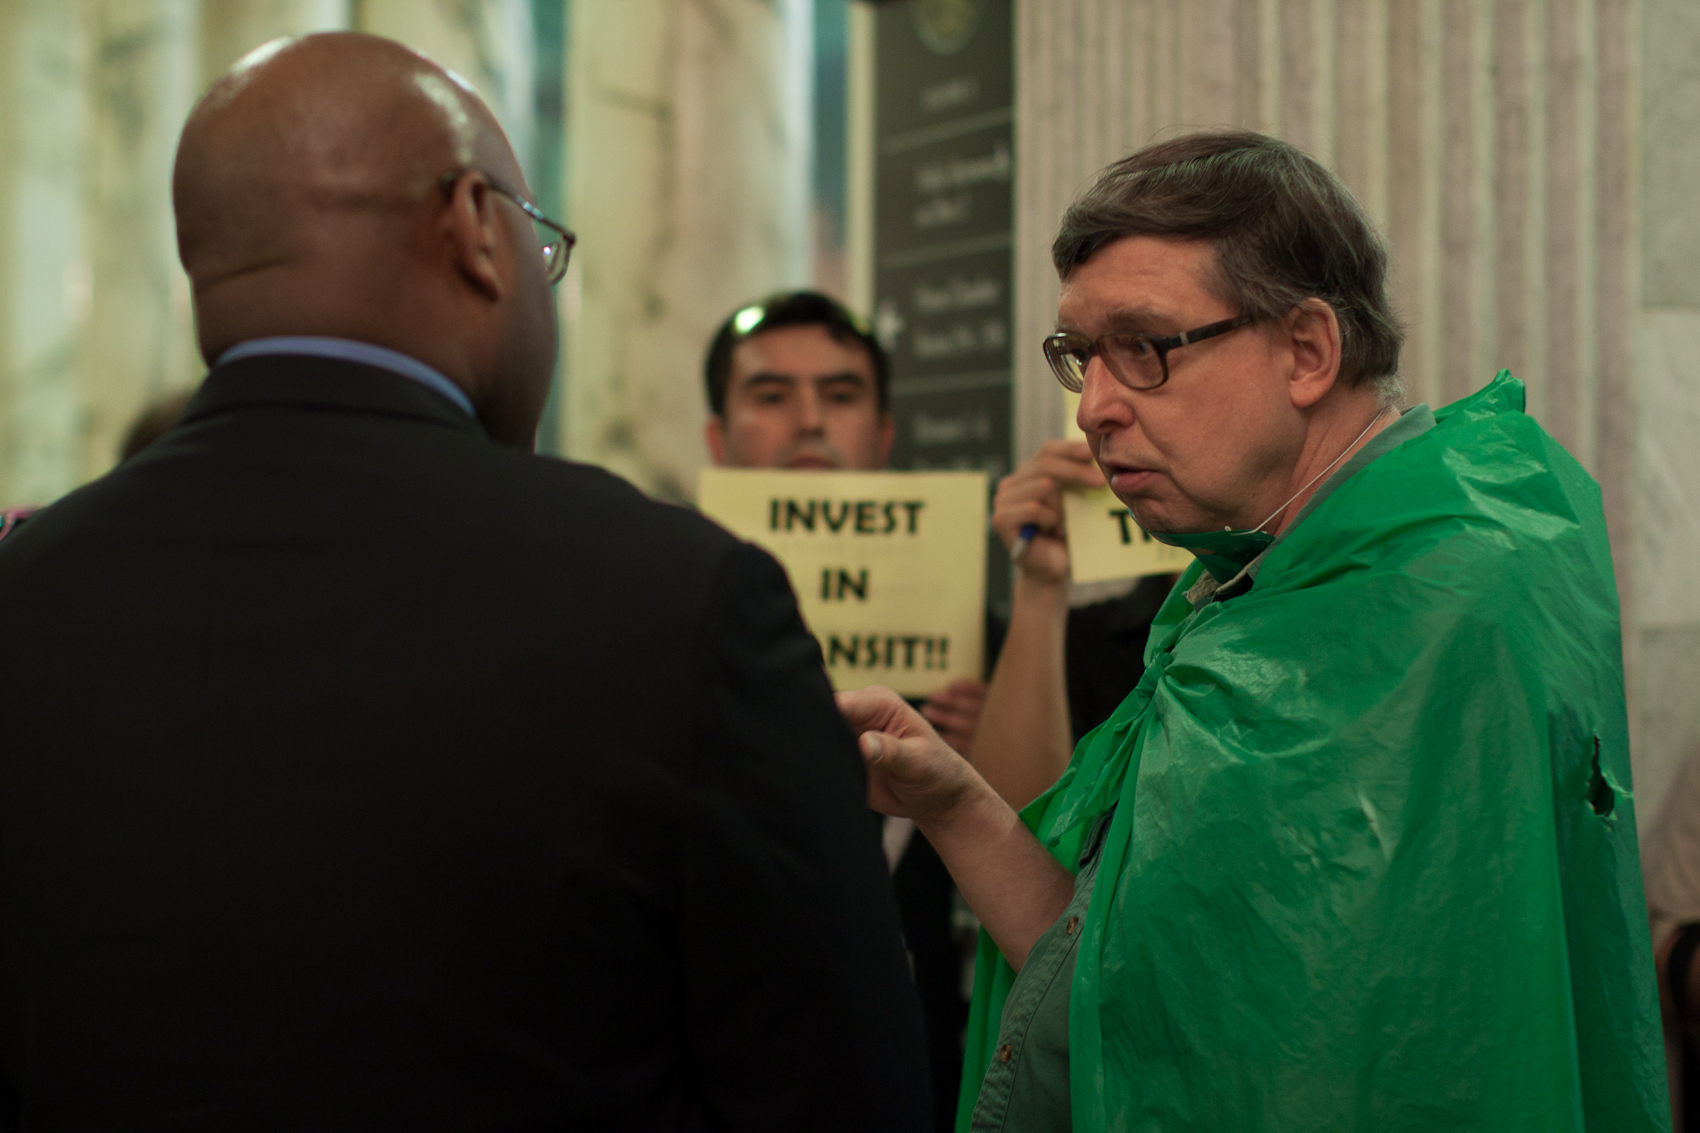 two men talking with a people holding invest in transit signs